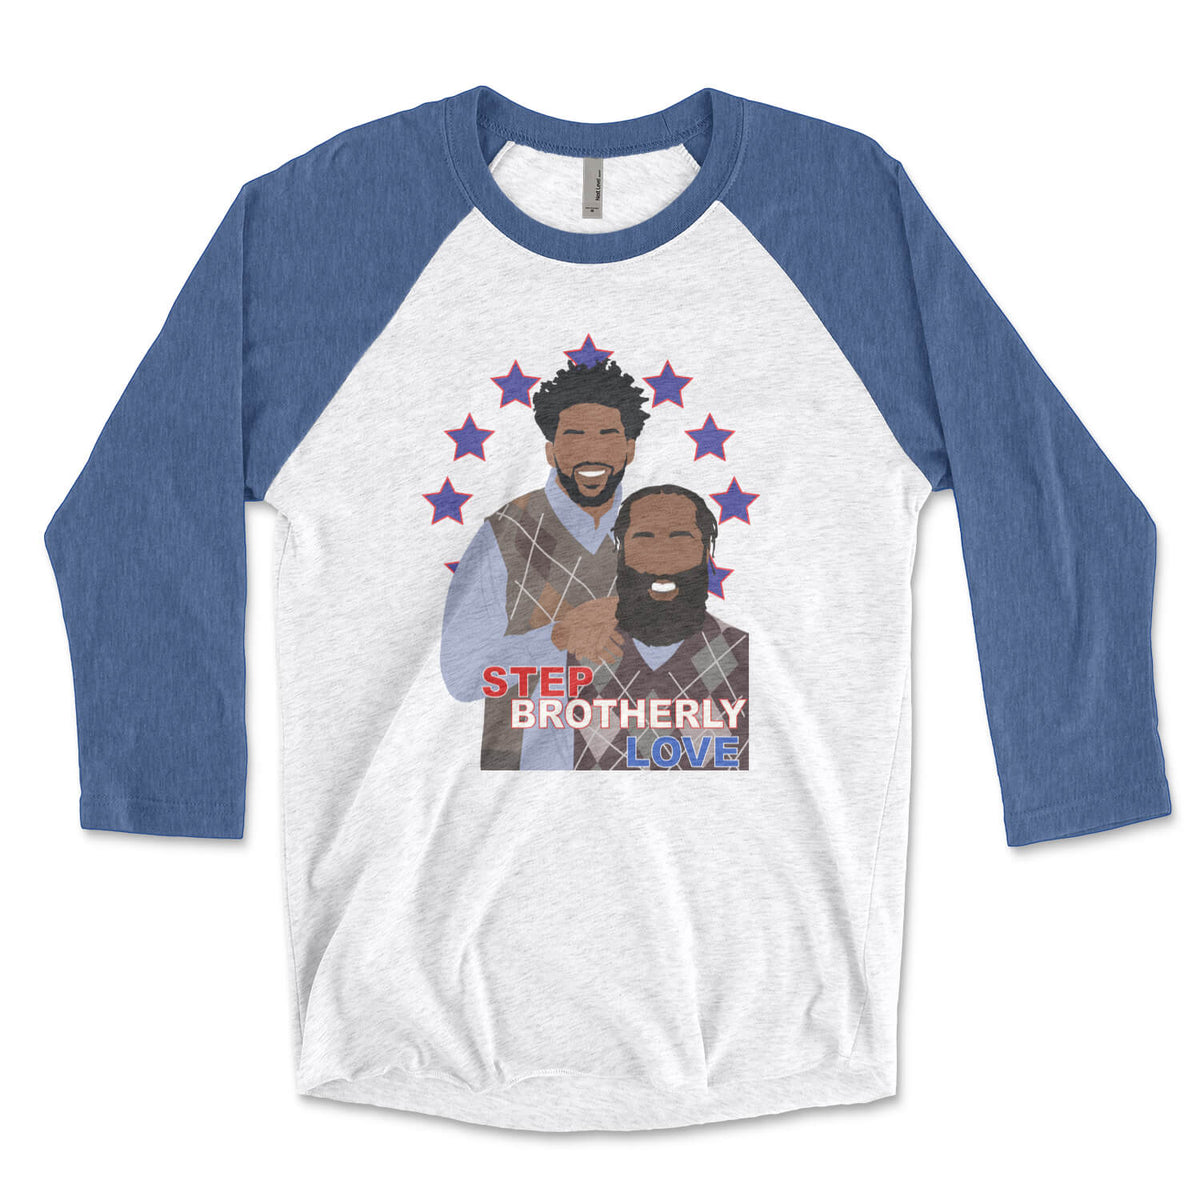 Philadelphia 76ers Joel Embiid &amp; James Harden Step Brothers Sixers blue &amp; white raglan t-shirt from Phillygoat